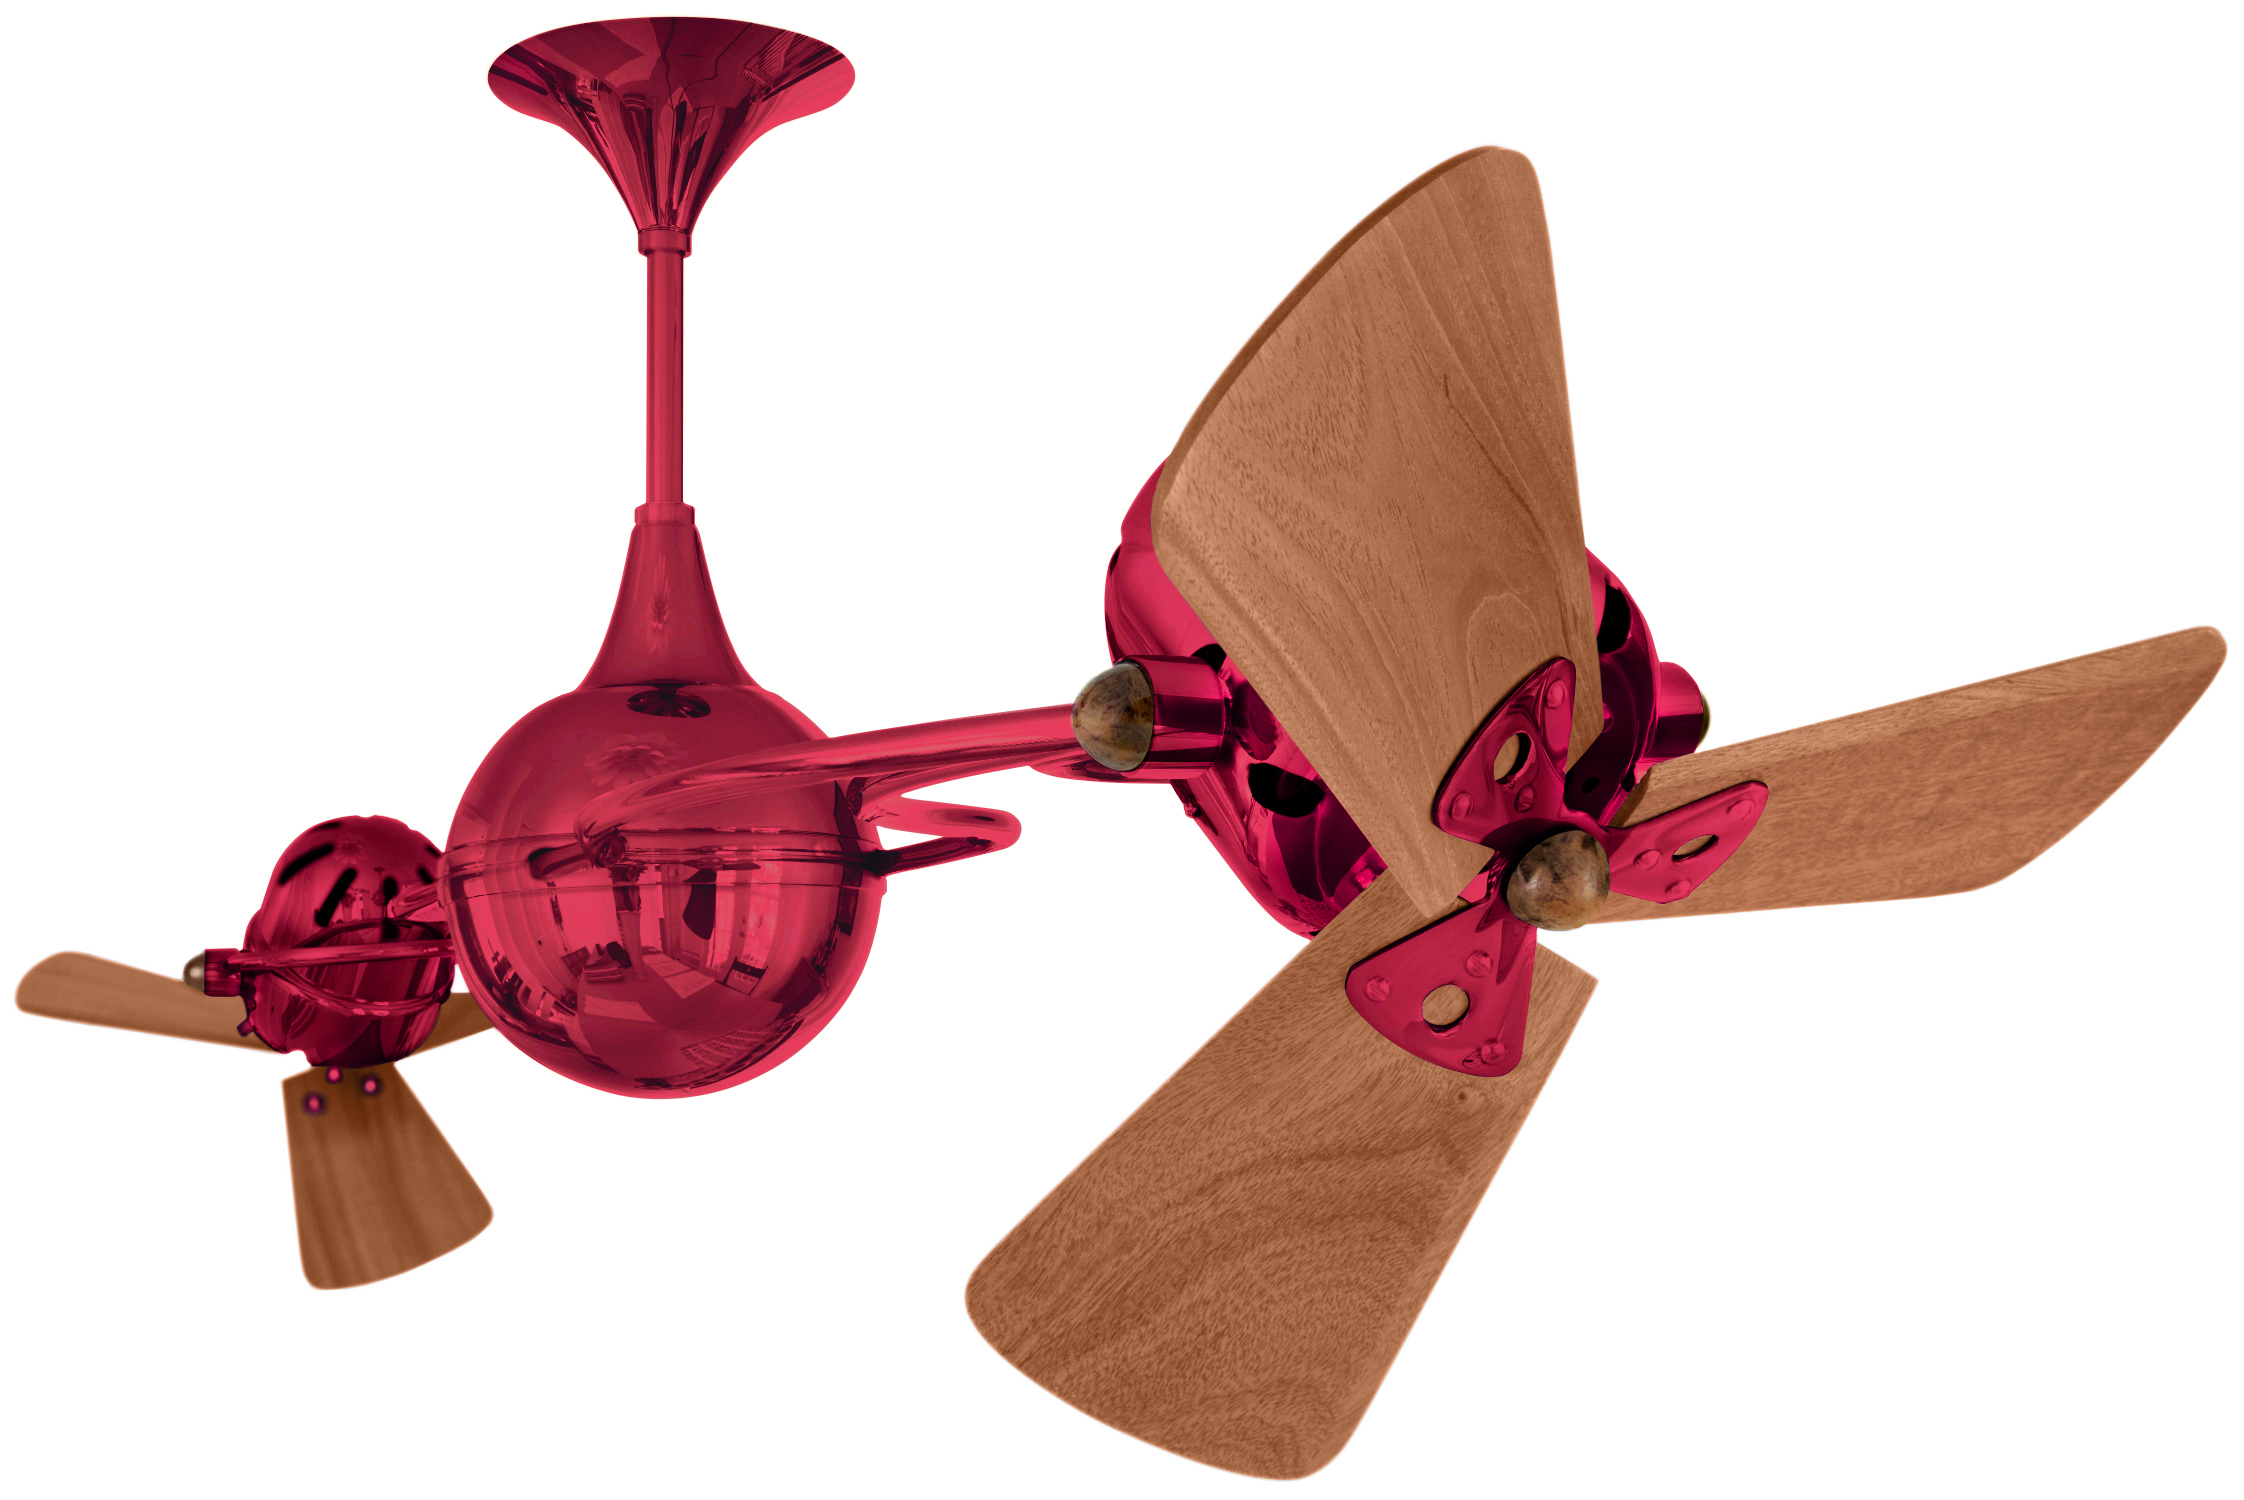 Italo Ventania rotational dual head ceiling fan in red / rubi finish with solid mahogany wood blades made by Matthews Fan Company.